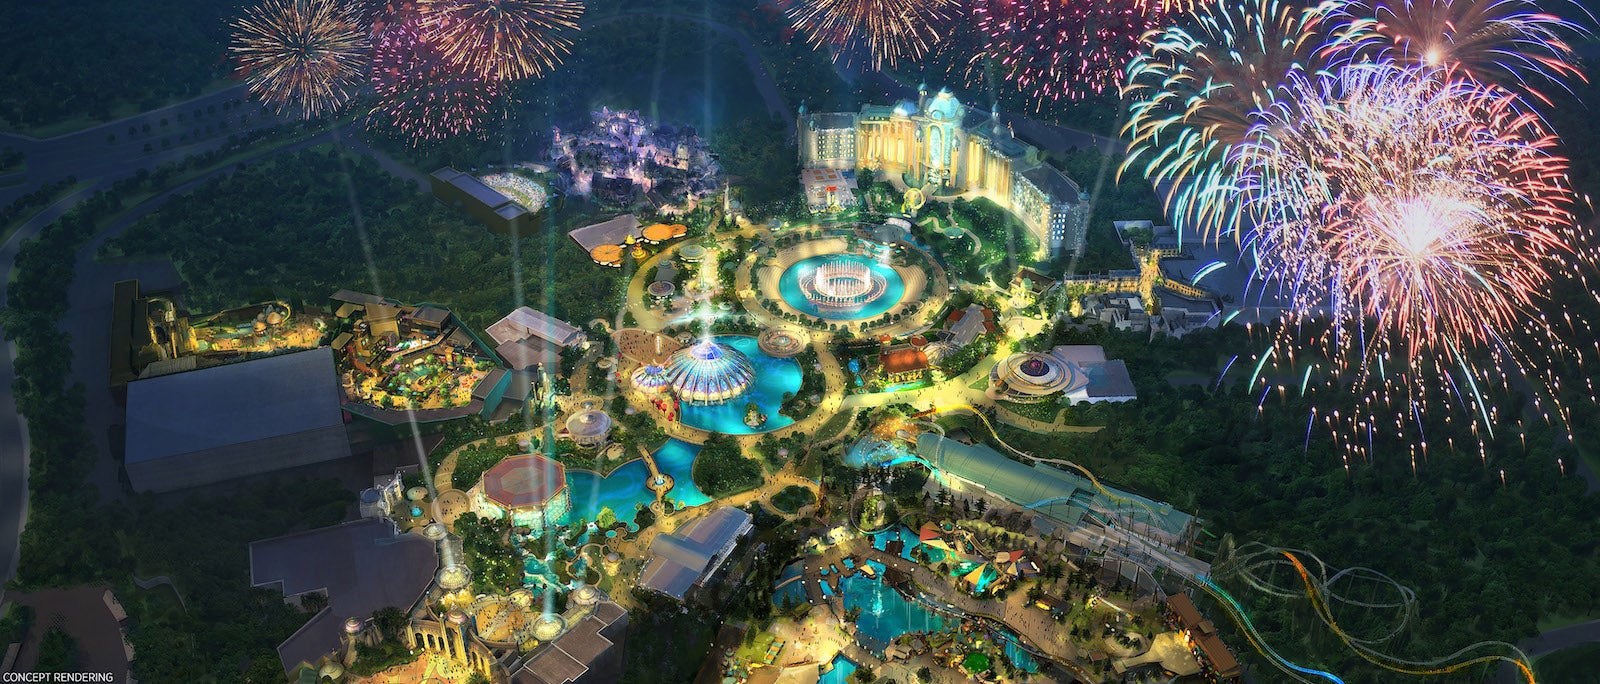 Rendering of Universal's Epic Universe theme park